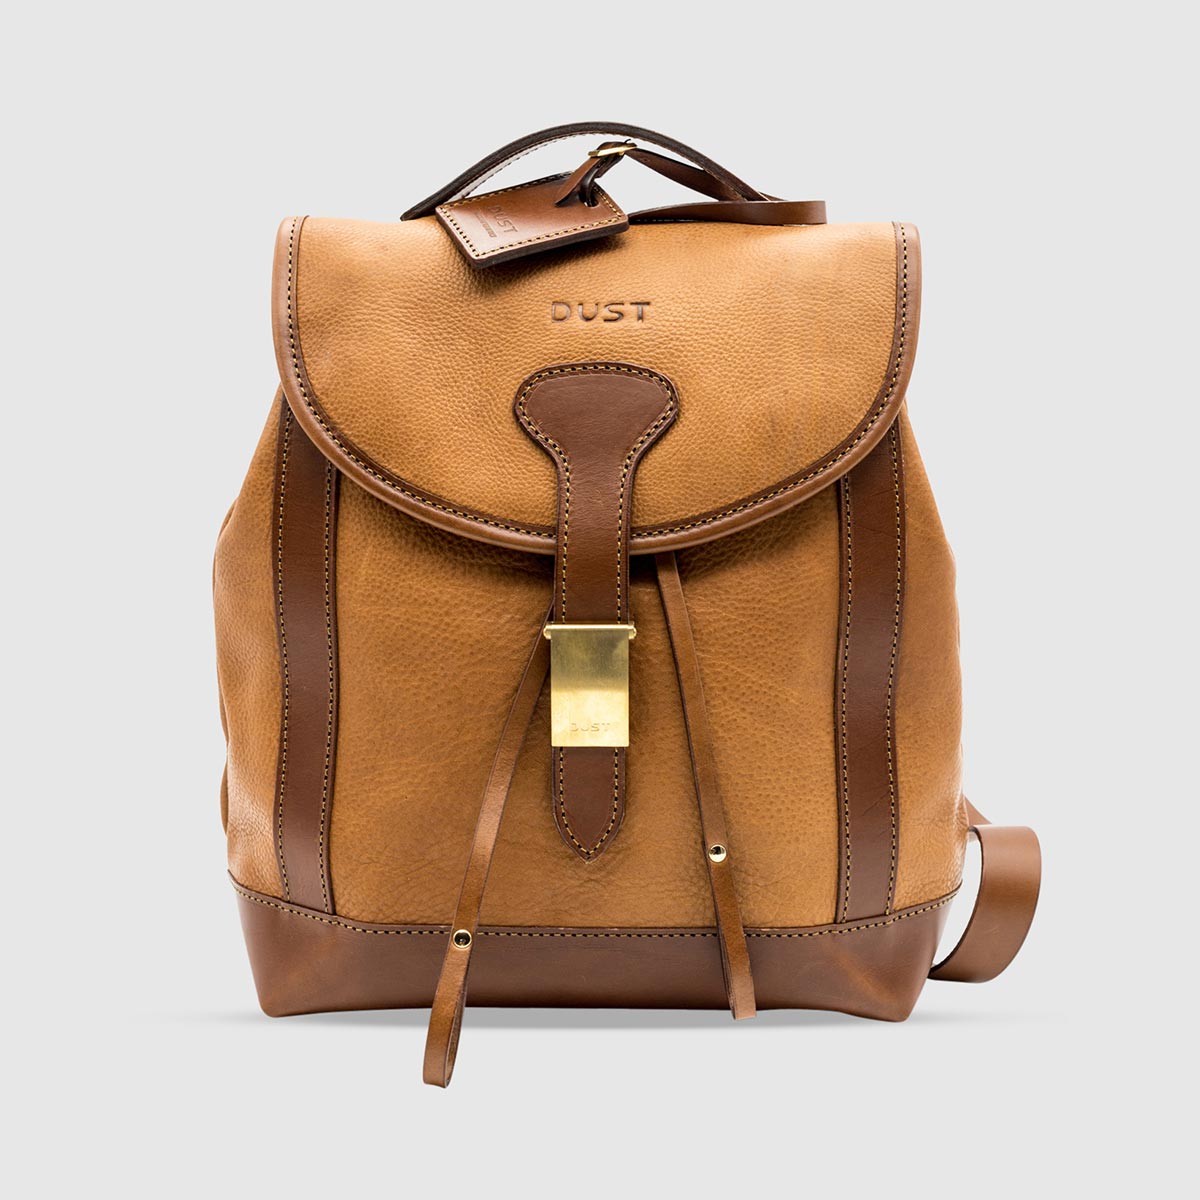 Vegetable Tumbled Leather Backpack  – Light Brown Leather